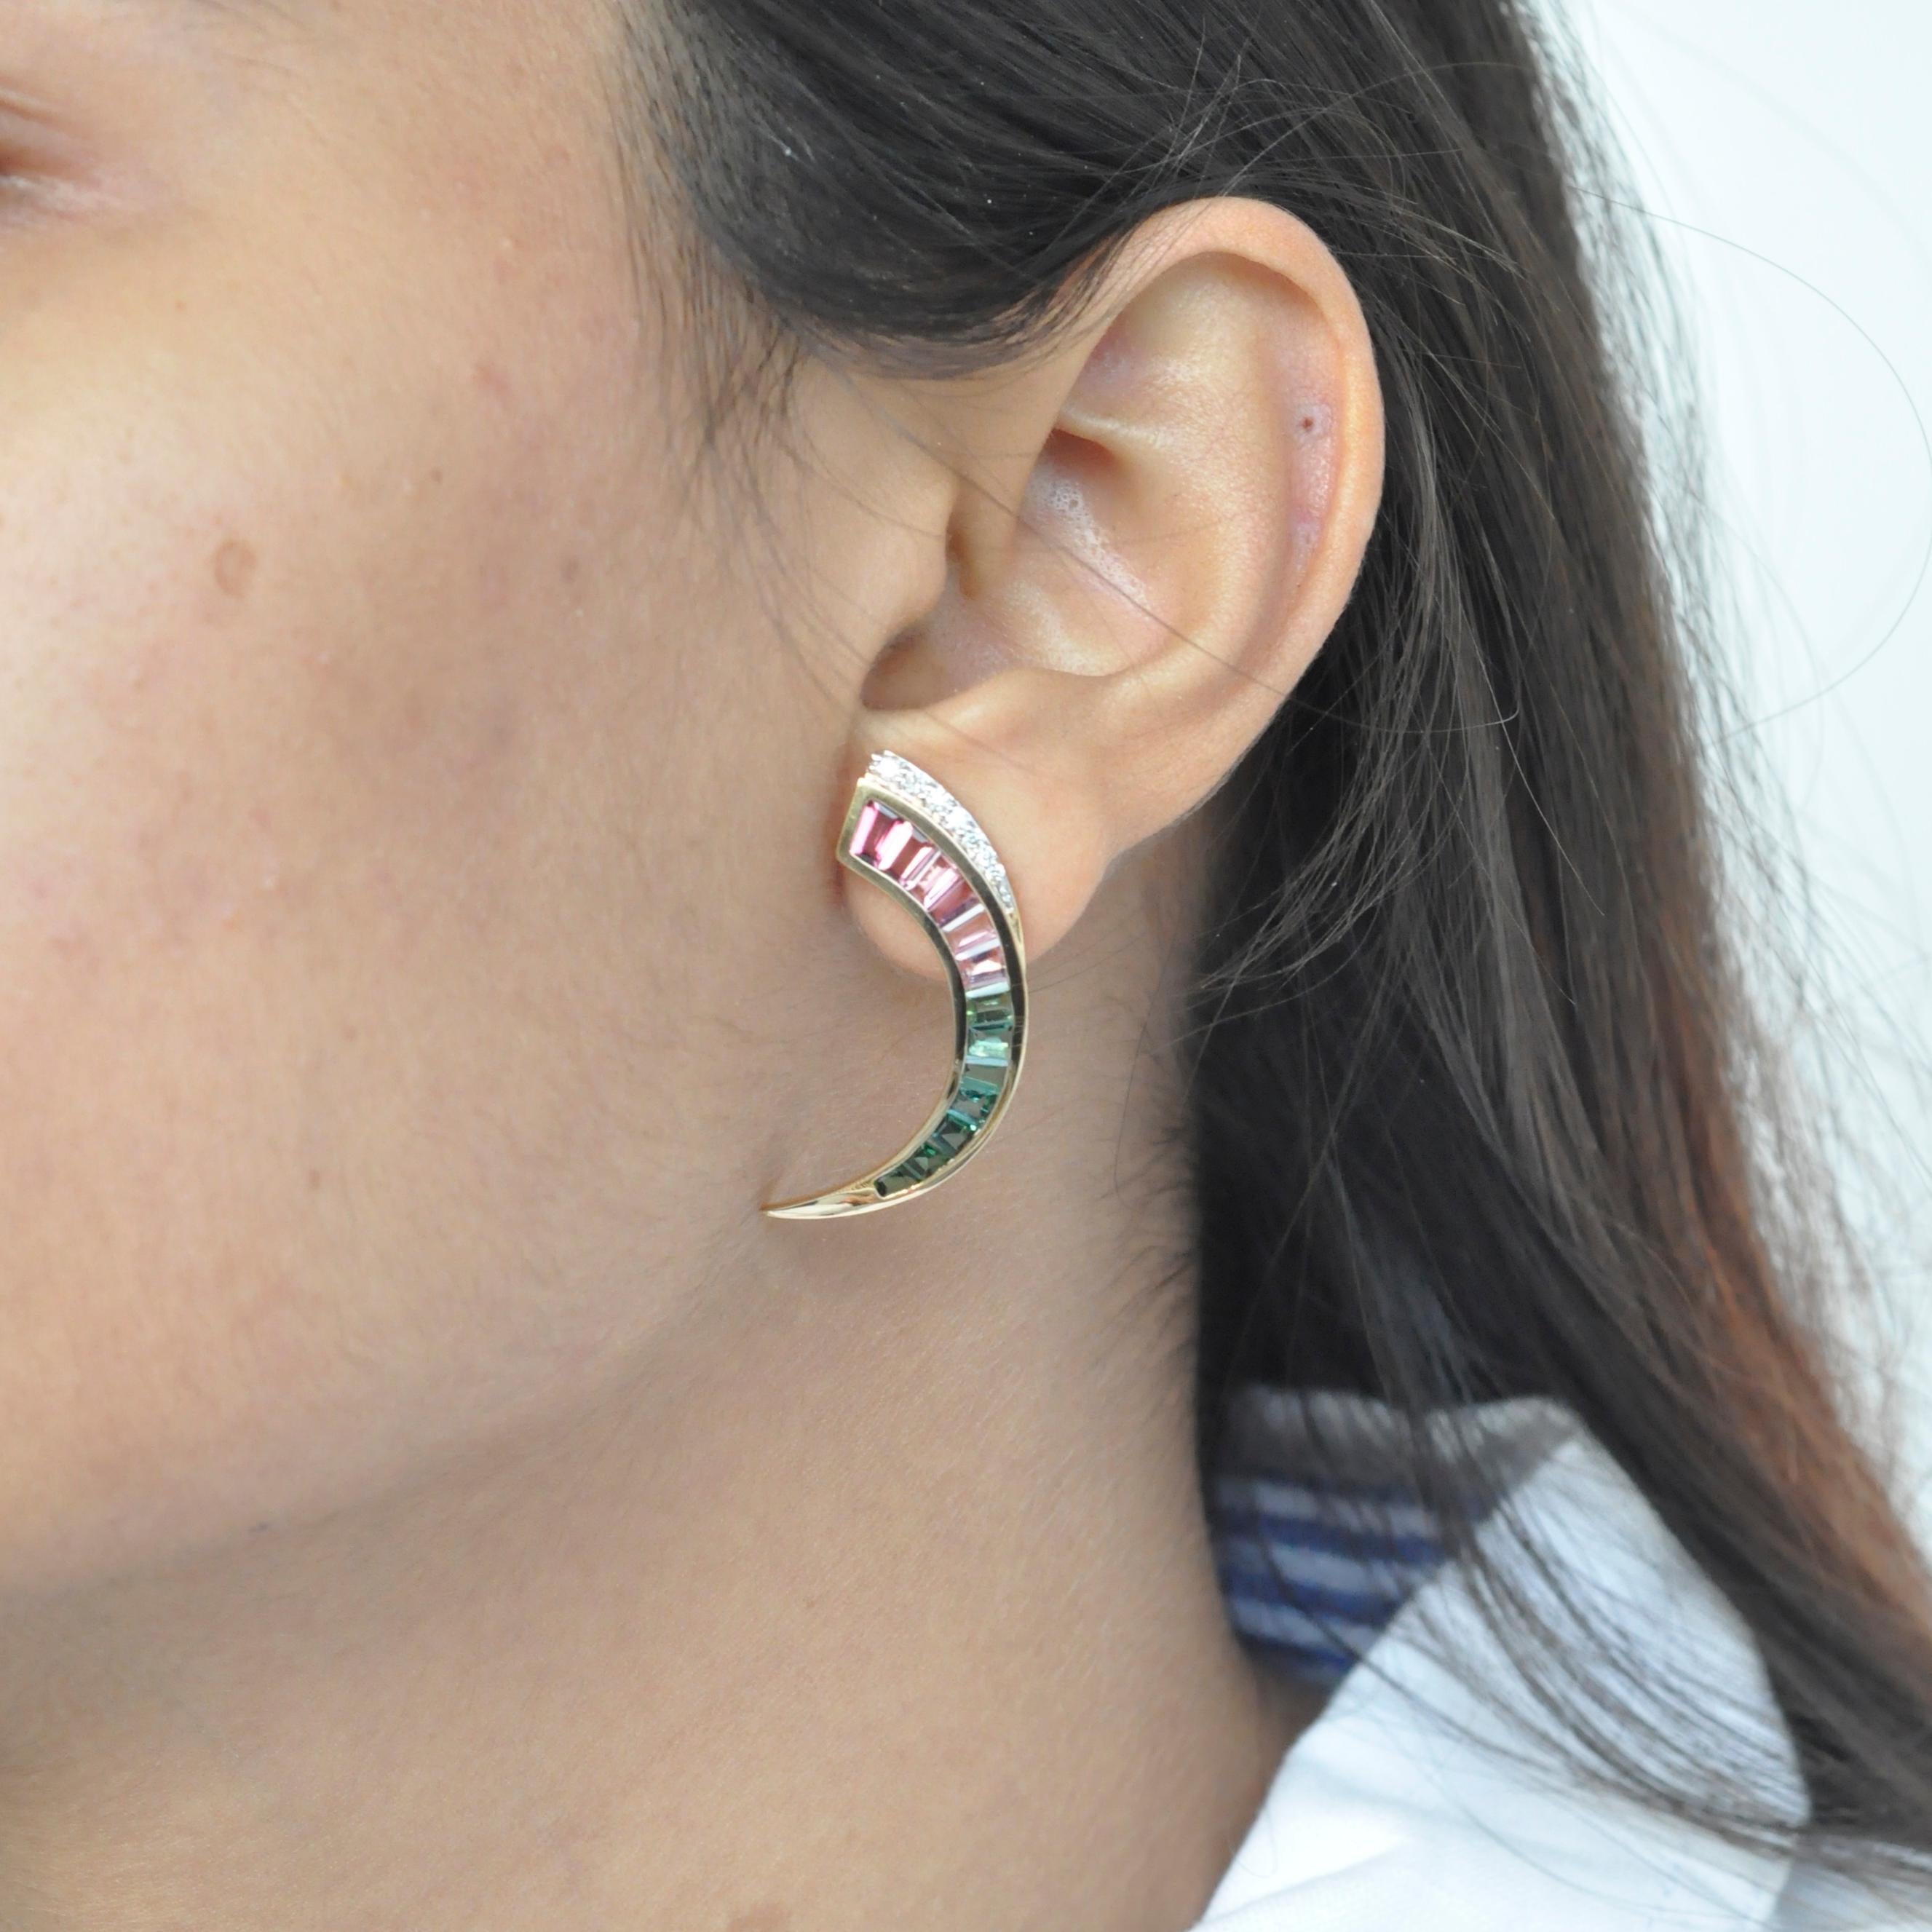 Extremely modernist, extremely edgy - these one-of-a-kind bitourmaline drop earrings are magnificent. Hand picked selection of lustrous green and pink tourmalines are taper cut in colour gradation and channel set with perfection. The slight touch of